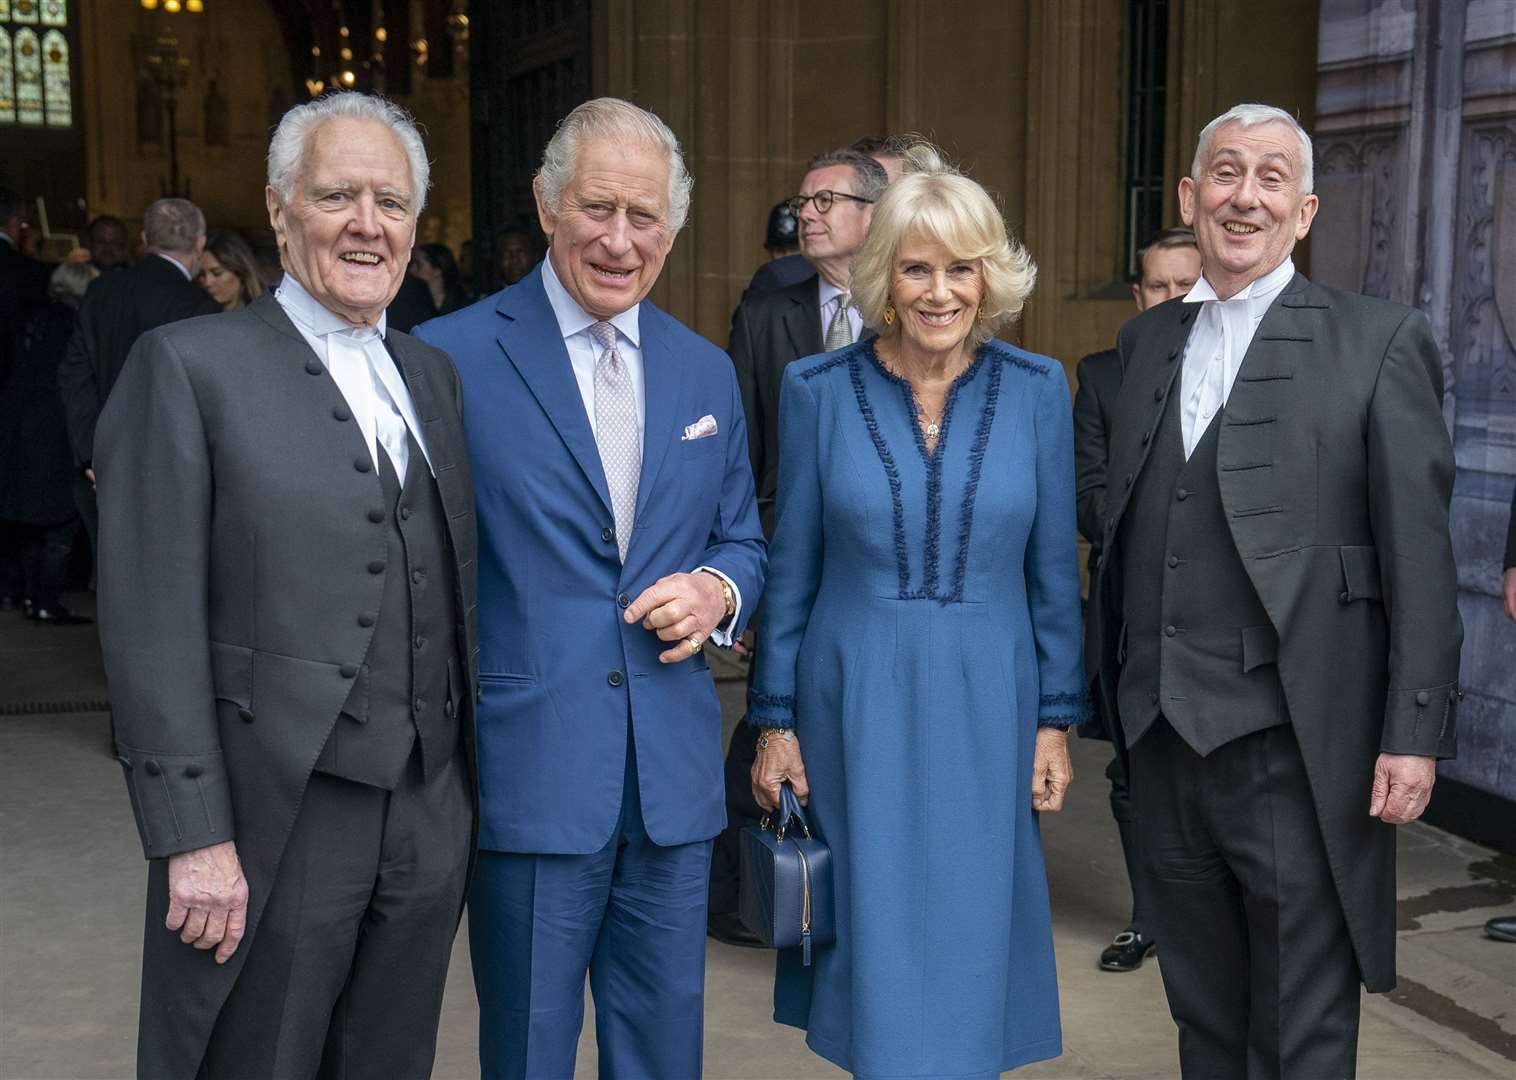 The King and the Queen Consort with Lords Speaker Lord McFall of Alcluith (left) and Commons Speaker Sir Lindsay Hoyle during their visit to Westminster Hall (Arthur Edwards/PA)